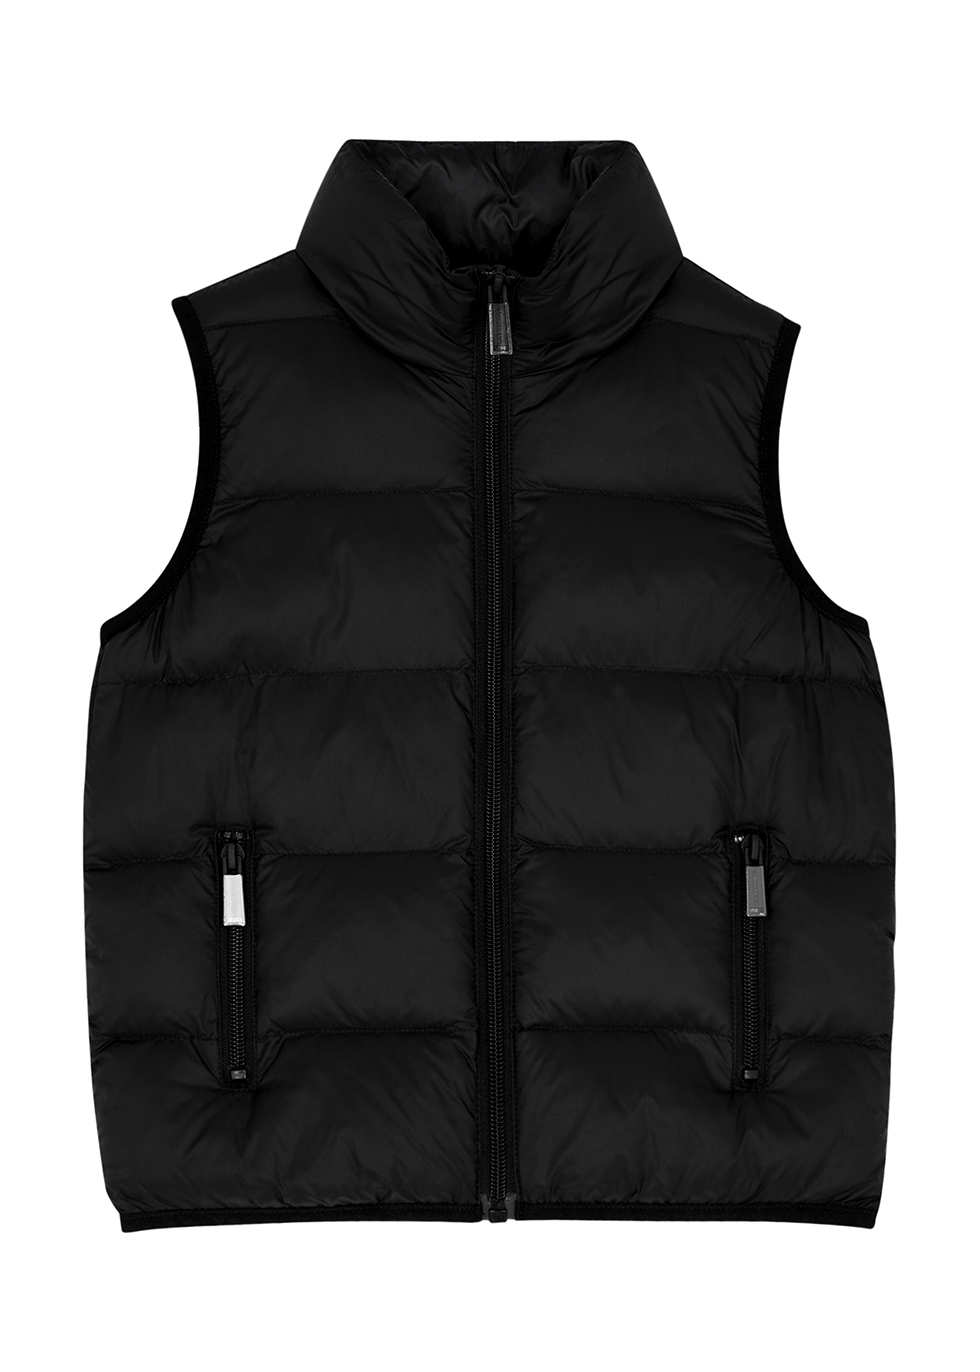 KIDS Black quilted shell gilet